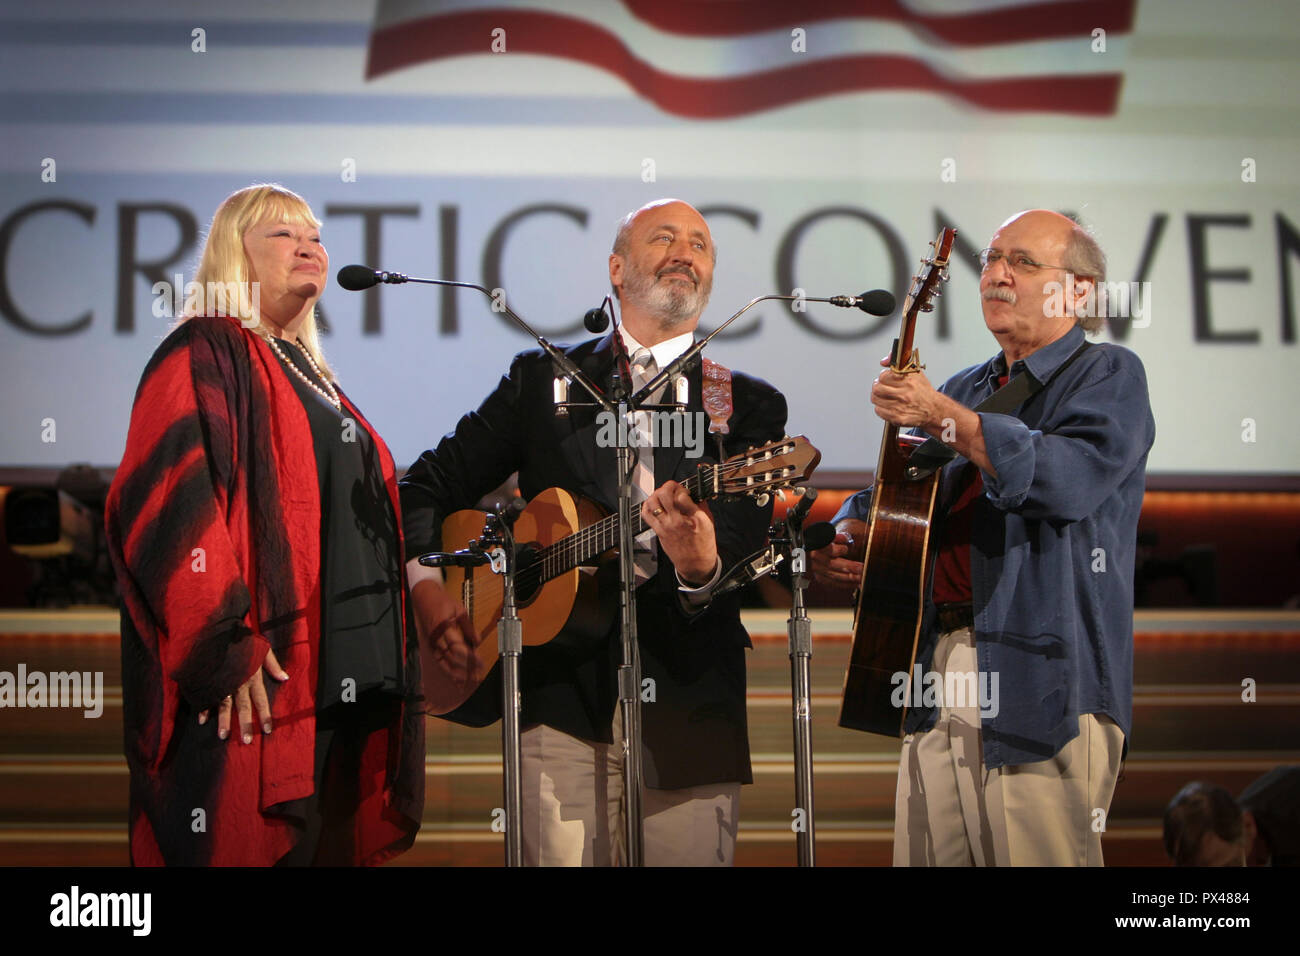 American Folk Group, Peter Paul and Mary, featuring Peter Yarrow, Noel Paul Stookey and Mary Travers perform during the 2004 Democratic National Conve Stock Photo